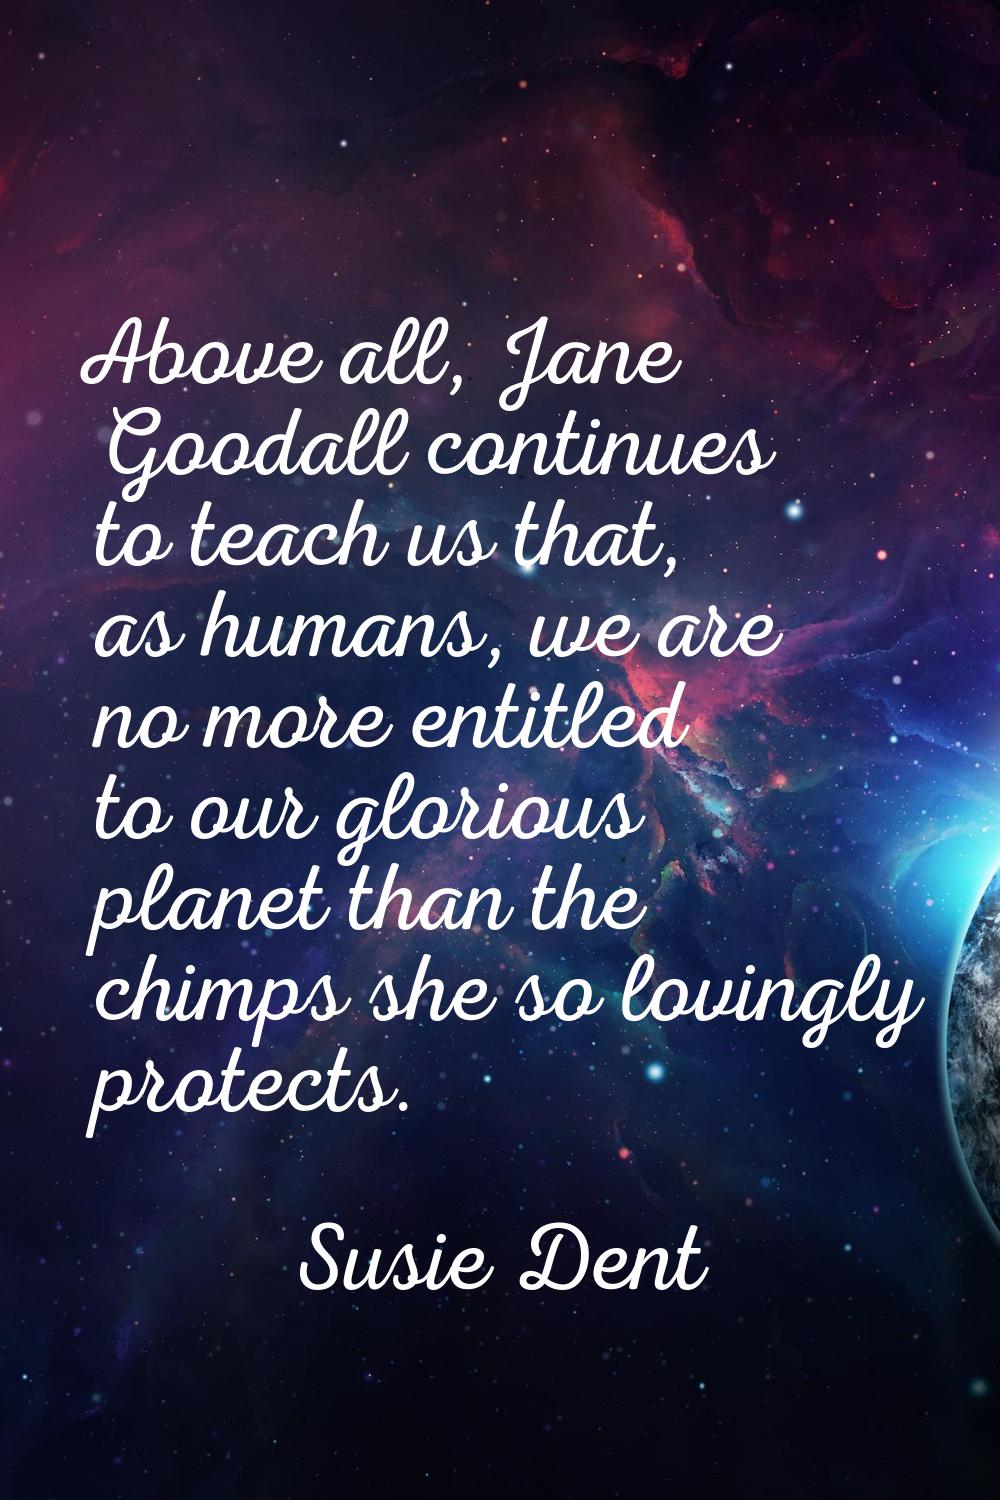 Above all, Jane Goodall continues to teach us that, as humans, we are no more entitled to our glori